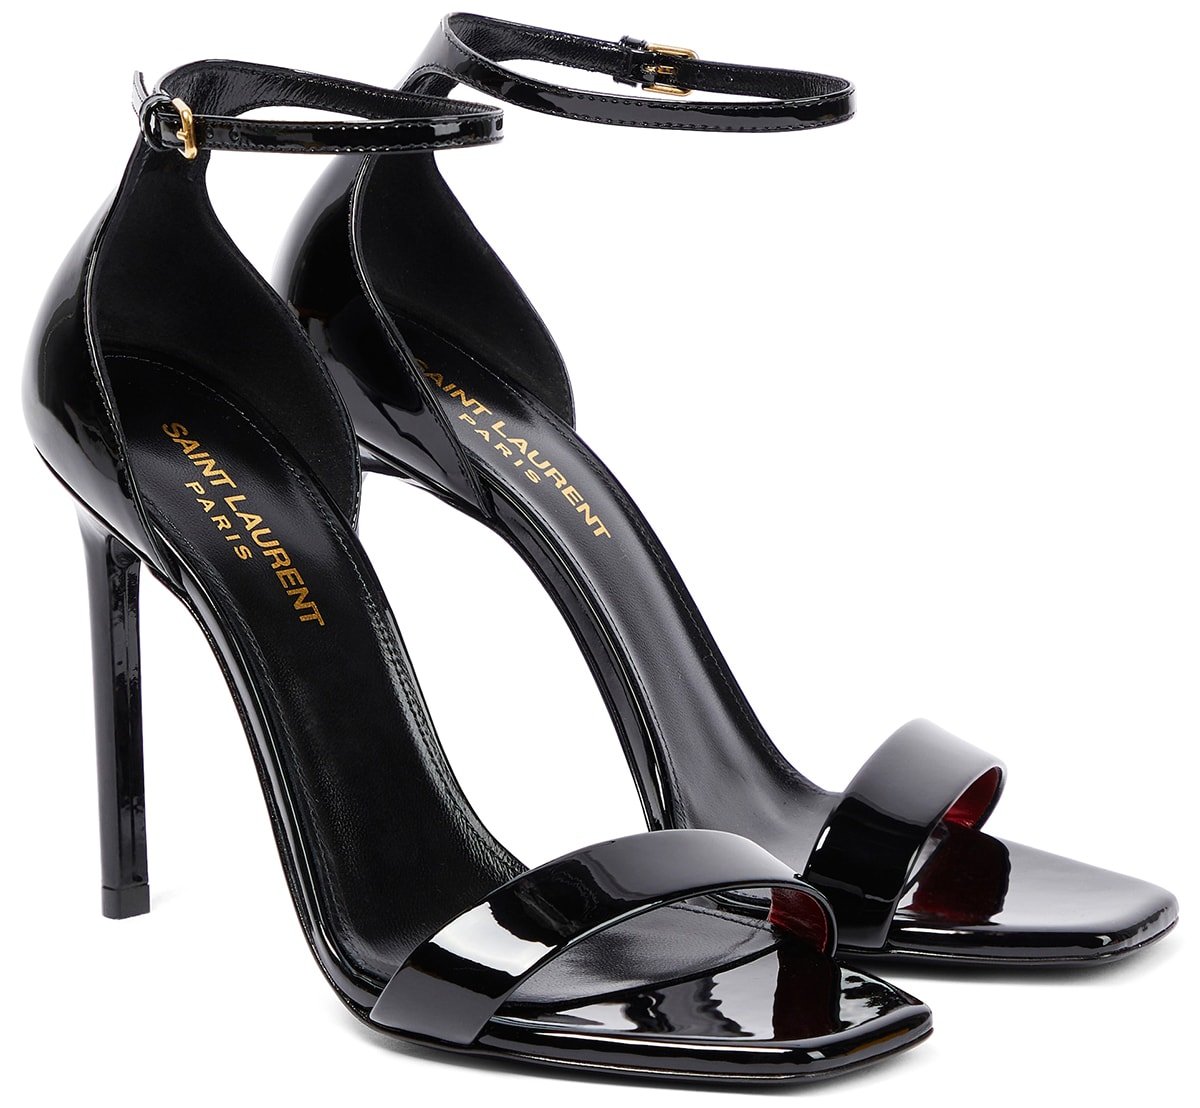 These Saint Laurent Amber sandals have trendy square open toes, ankle straps, and thin stiletto heels